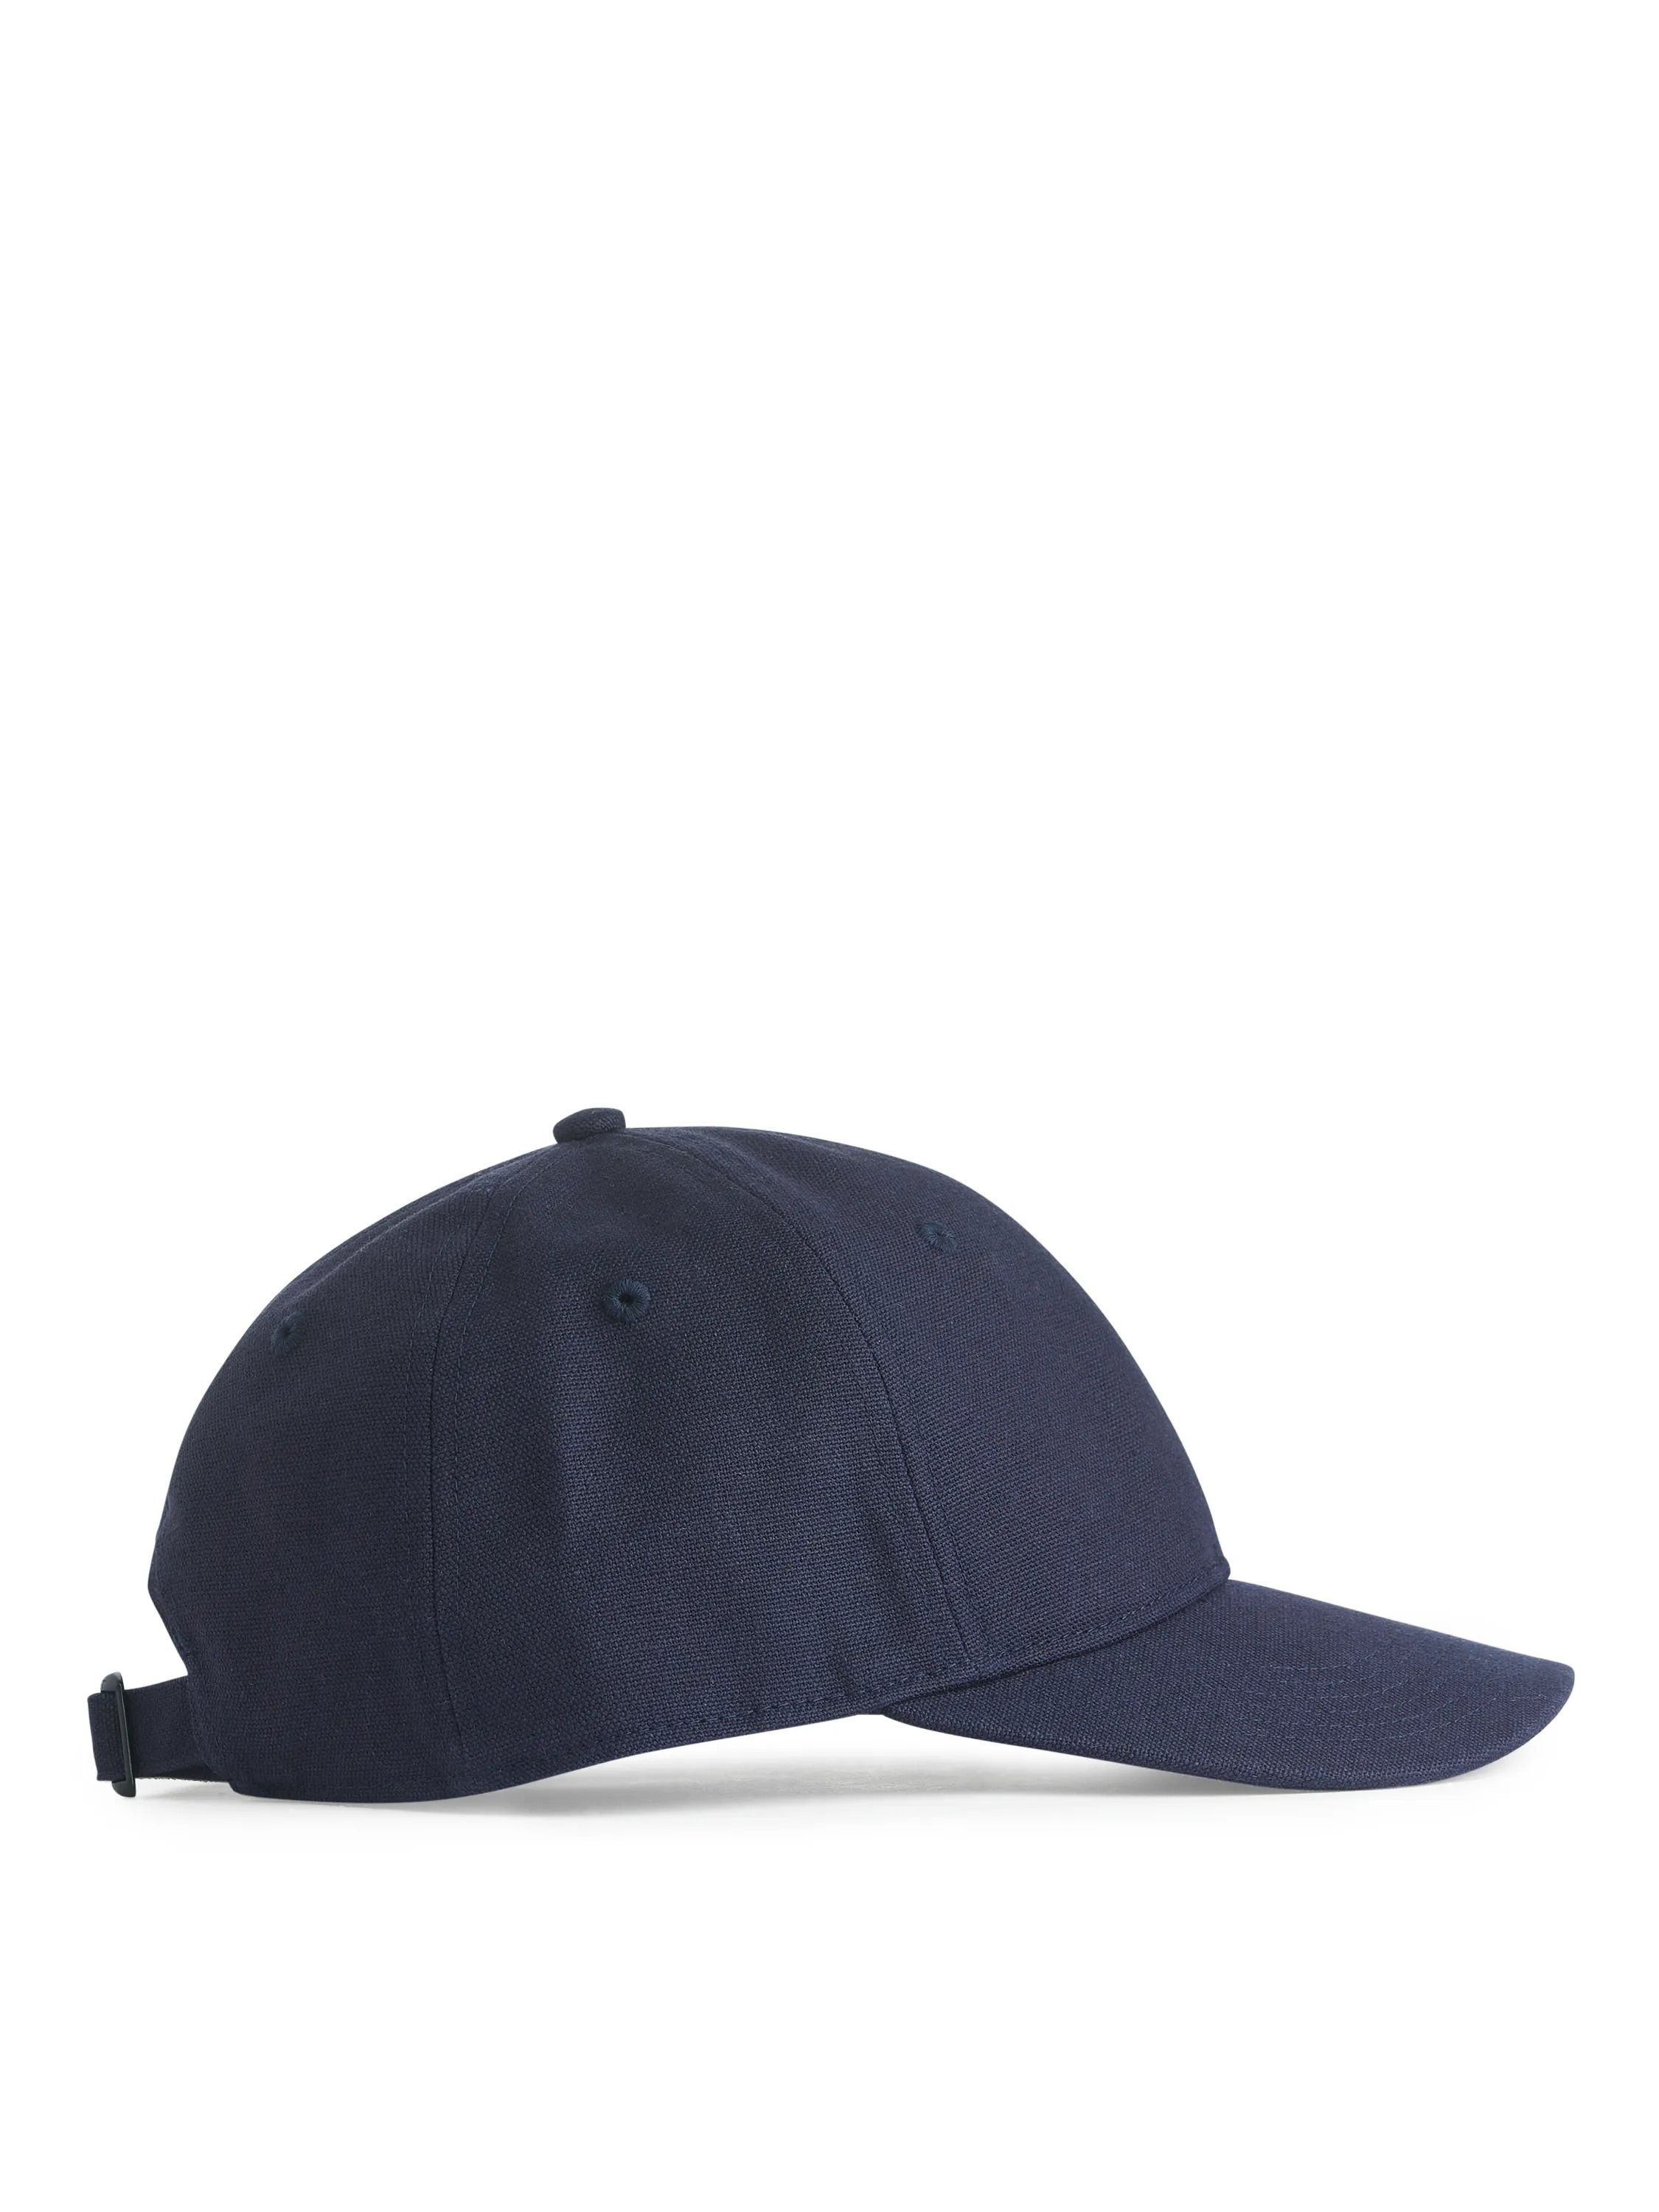 The best men's caps for 2023, including Carhartt, Arket and Paul